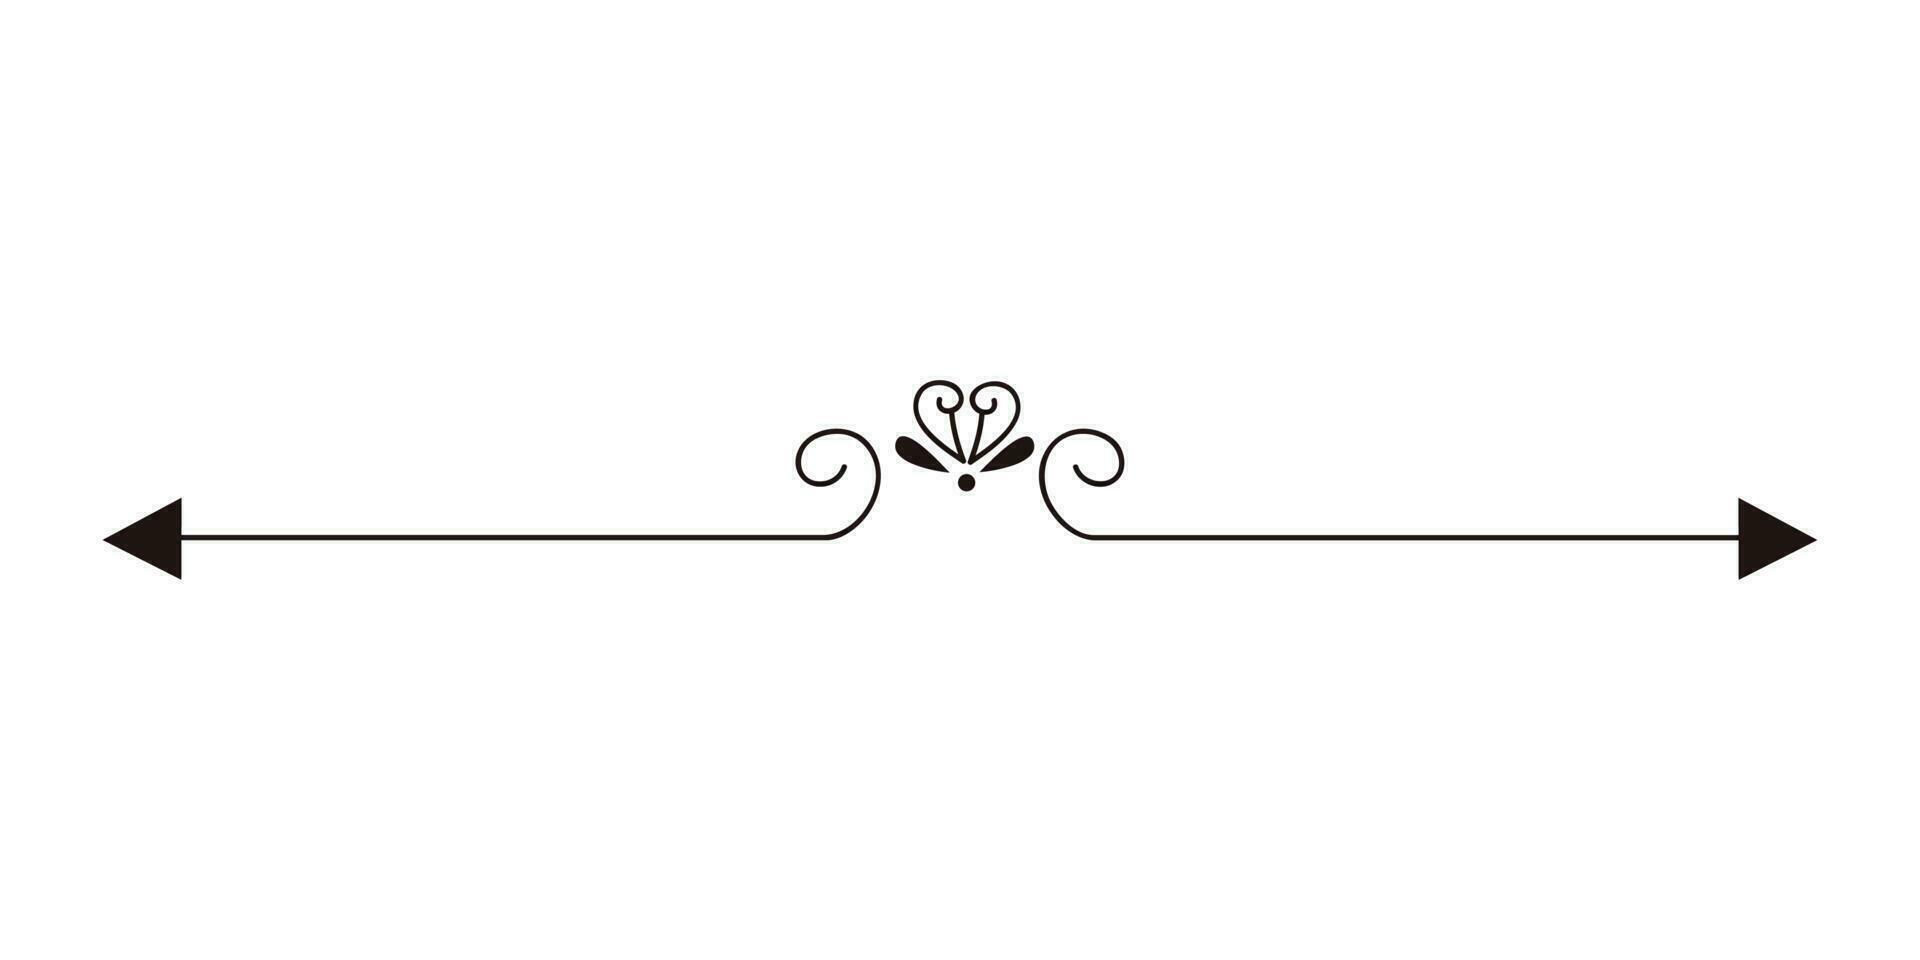 Flourished ornament dividers. Ink flourish and arrow decorations dividers. Vintage divider element. Black thin-line ornate design element collection for wedding invitations, Borders, etc. vector